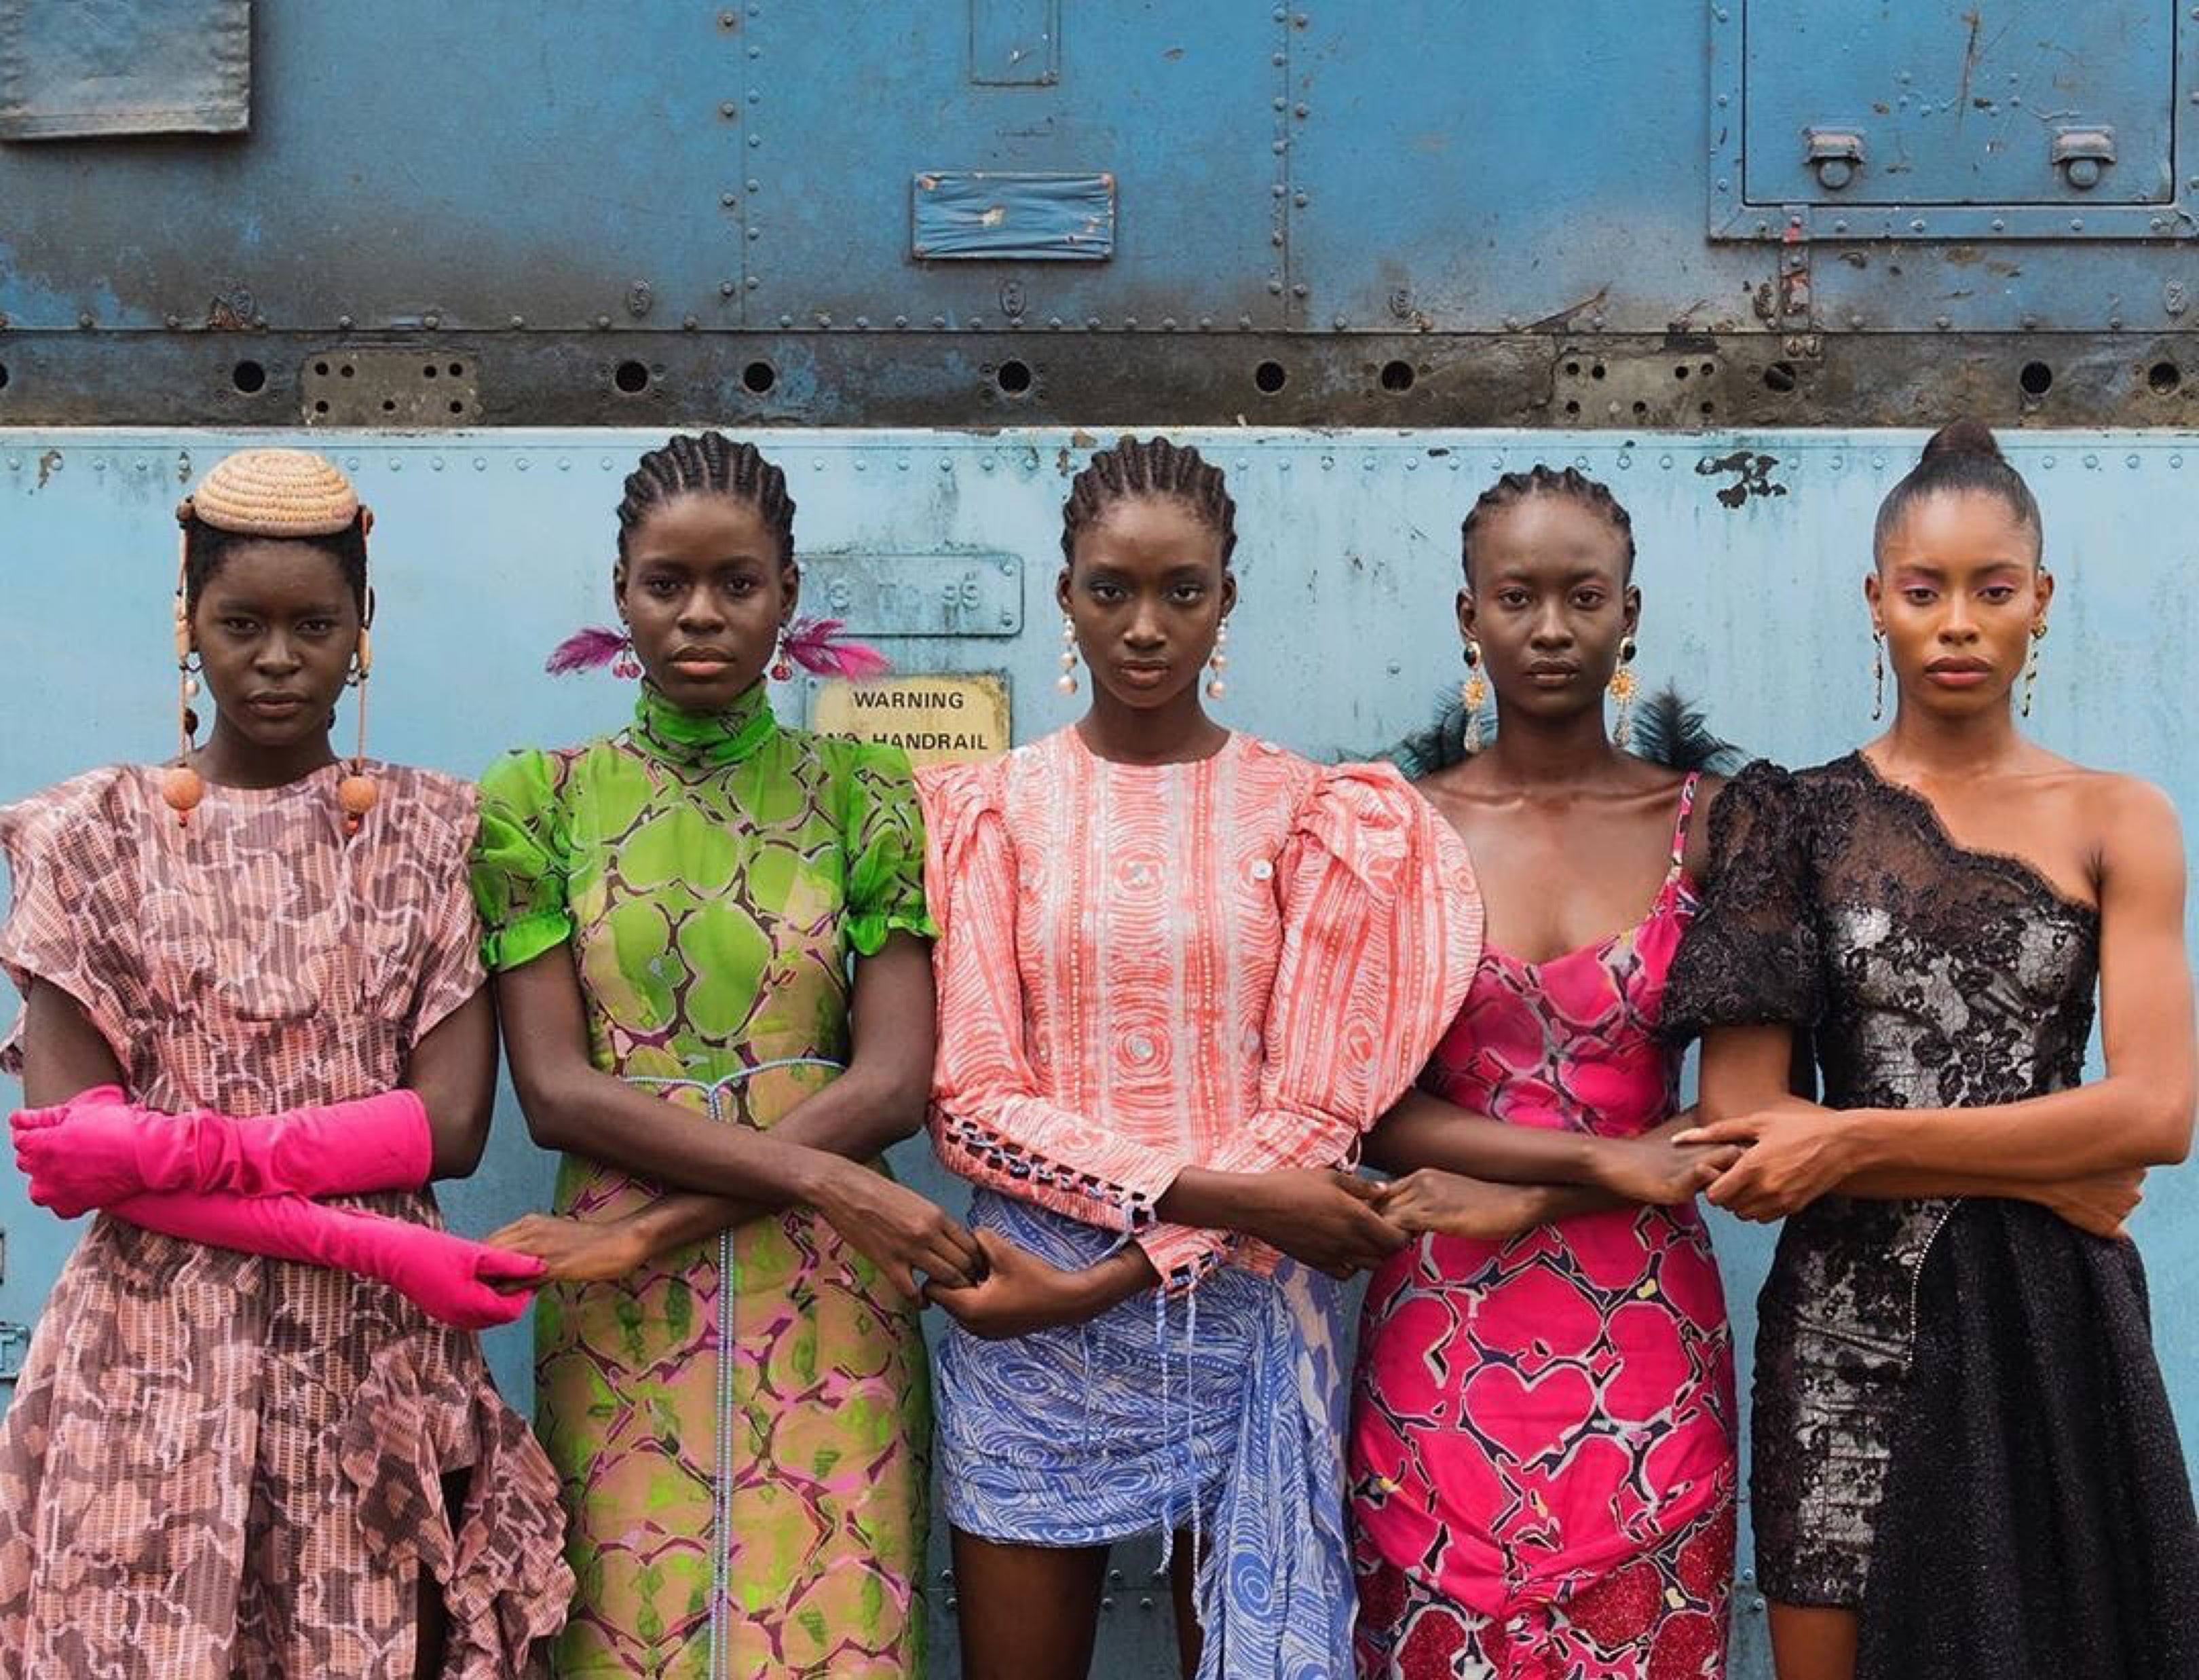 An image taken from the forthcoming Africa Fashion exhibition at London’s V&A